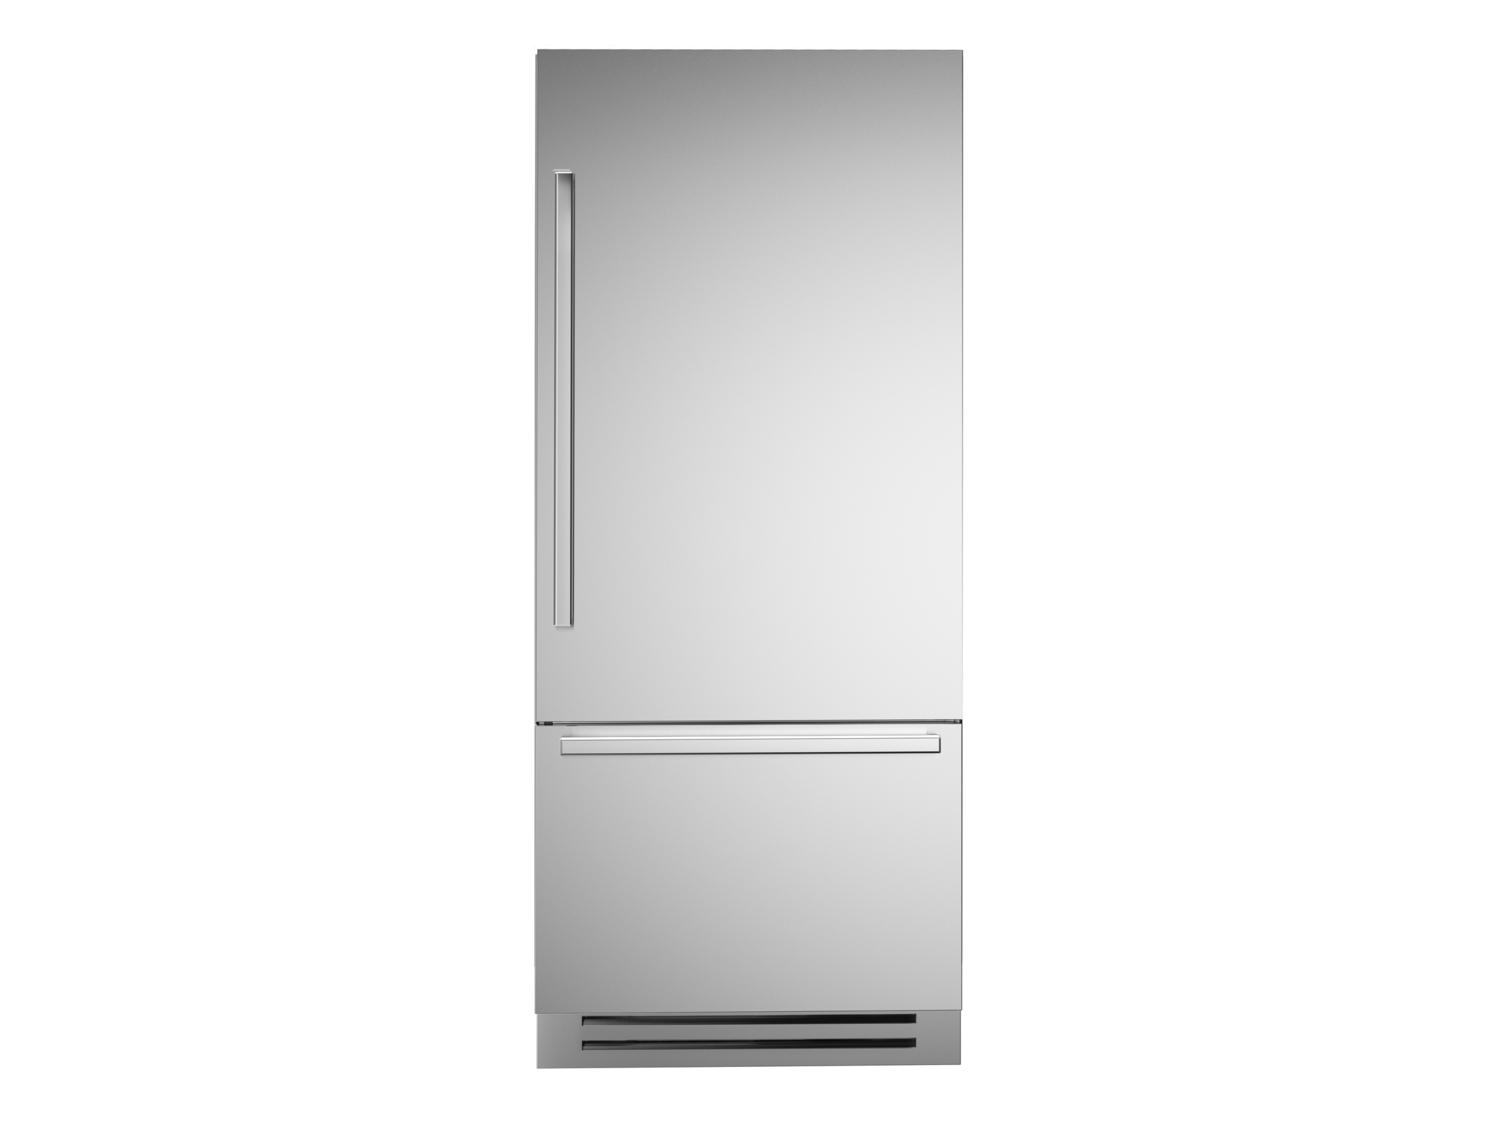 Bertazzoni REF36BMBIXRT 36 Inch Built-In Bottom Mount Refrigerator With Ice Maker, Stainless Steel Stainless Steel